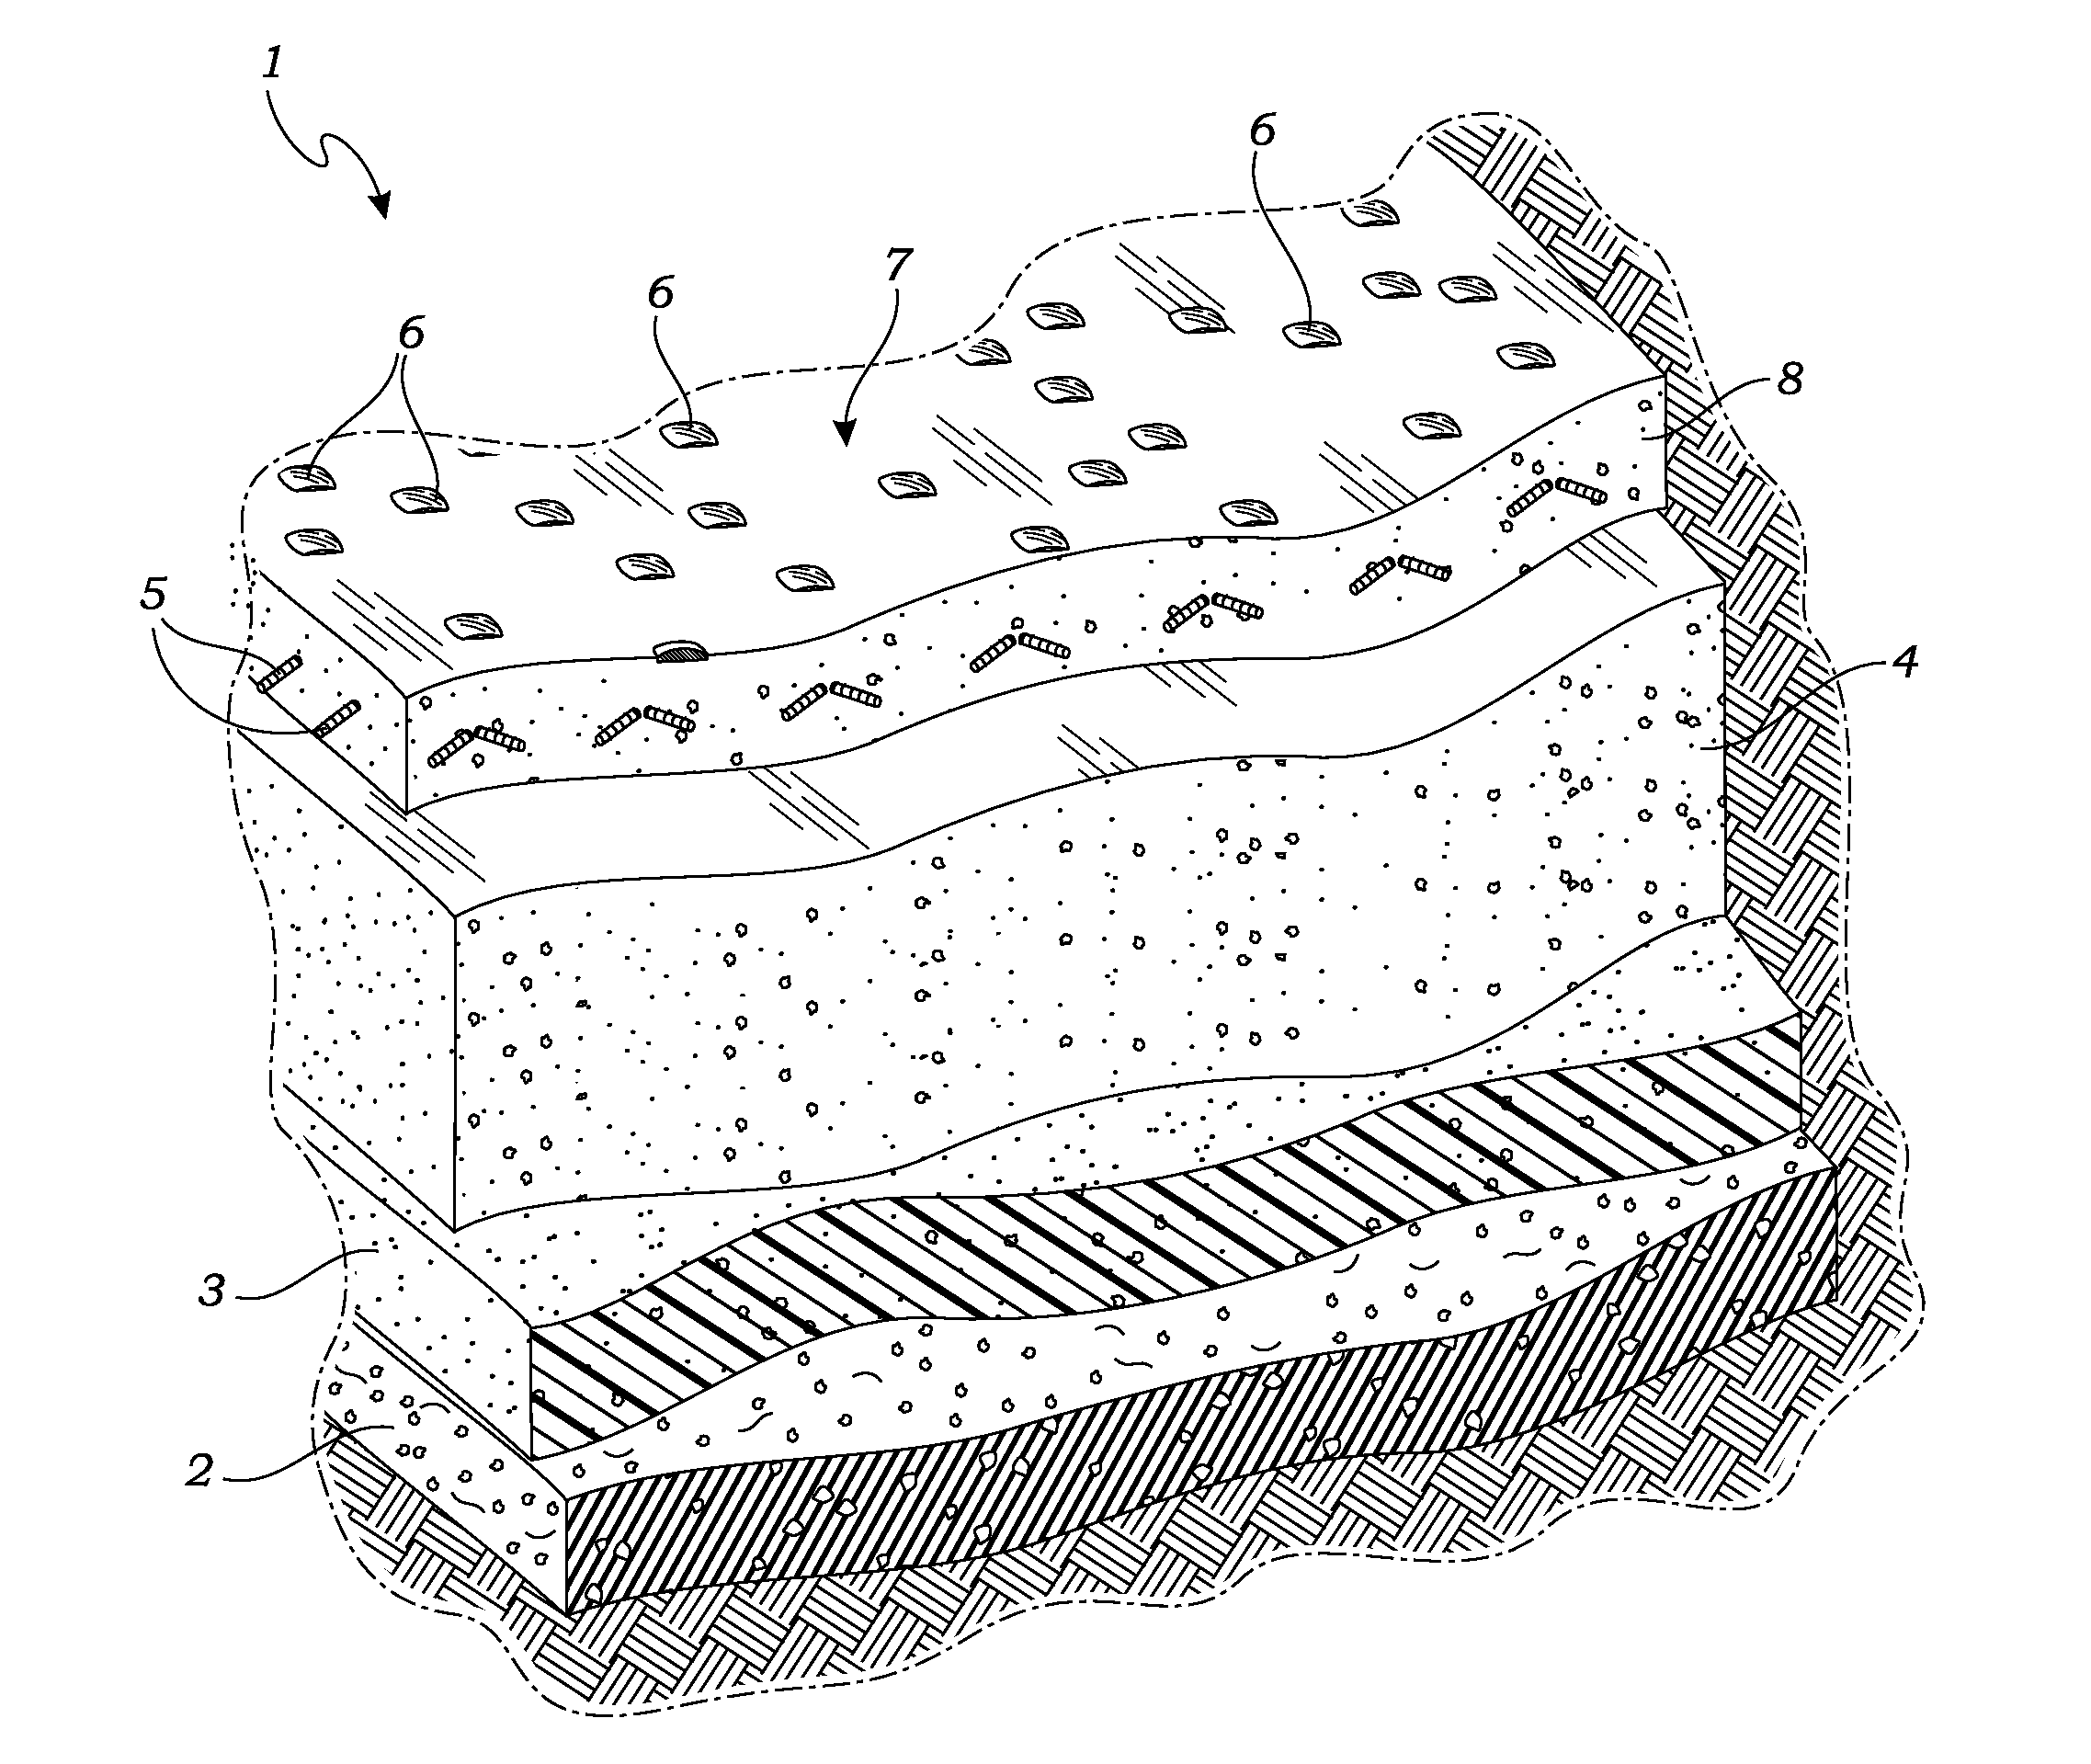 Multi-layered cement compositions containing photocatalyst particles and method for creating multi-layered cement compositions containing photocatalyst particles